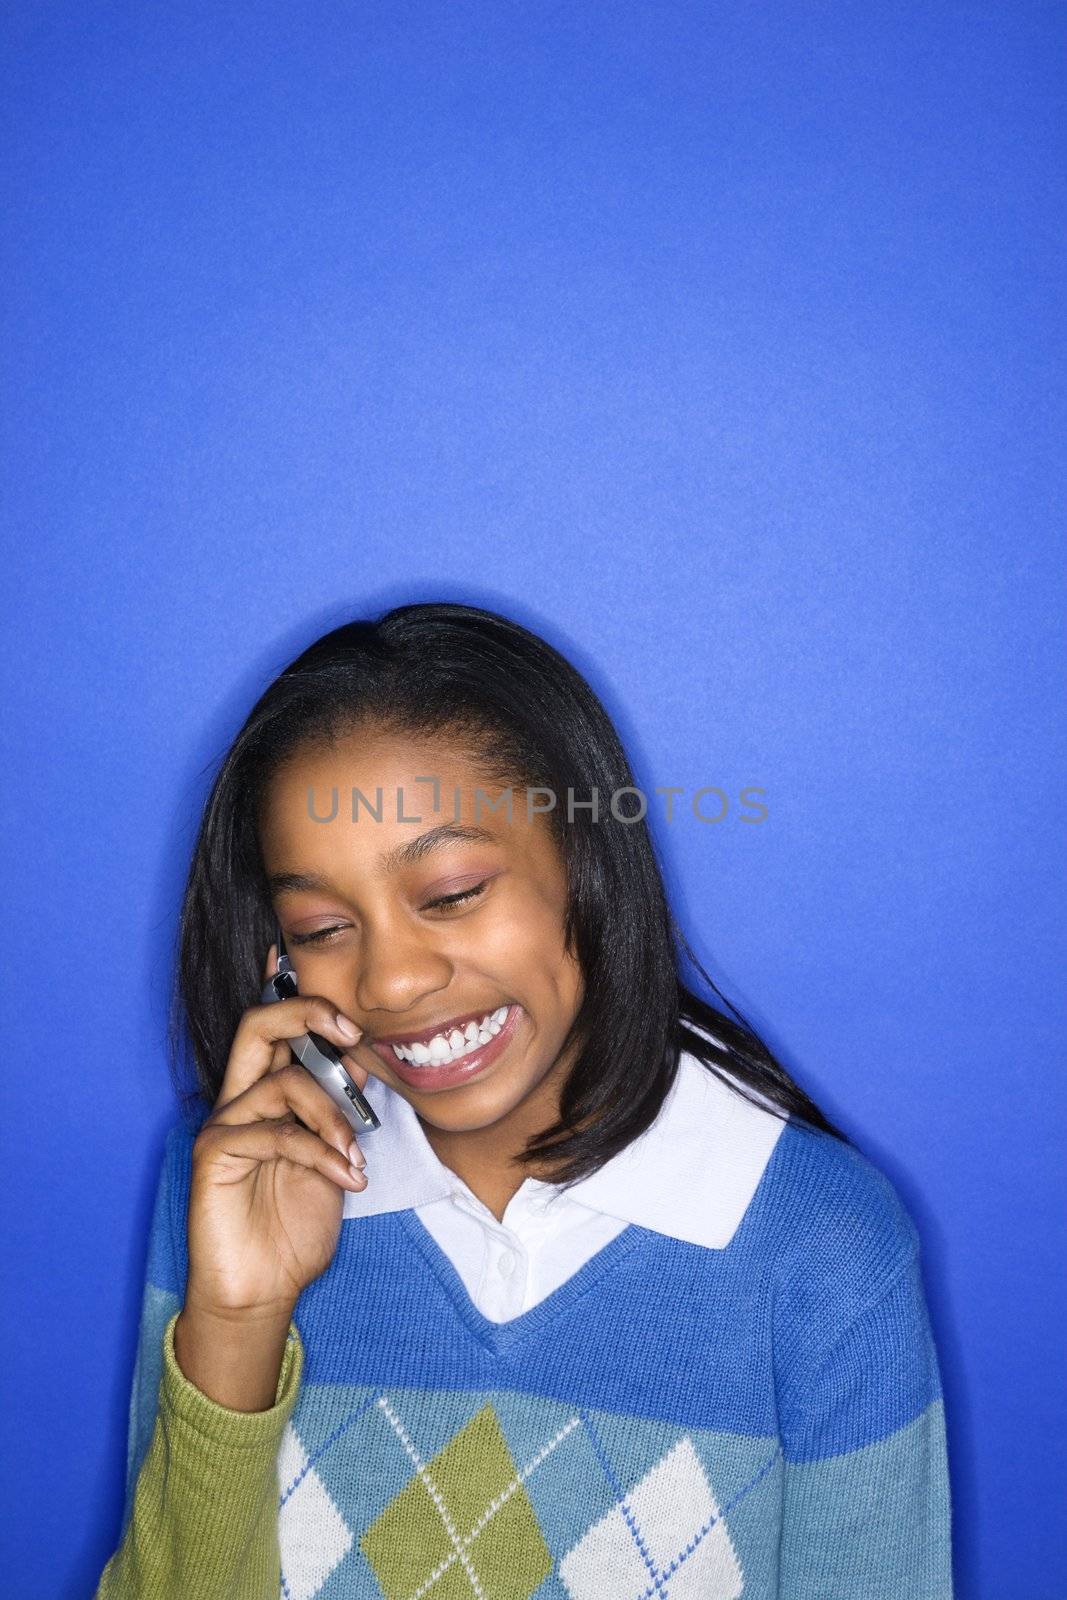 Portrait of African-American teen girl talking on cellphone smiling standing in front of blue background.